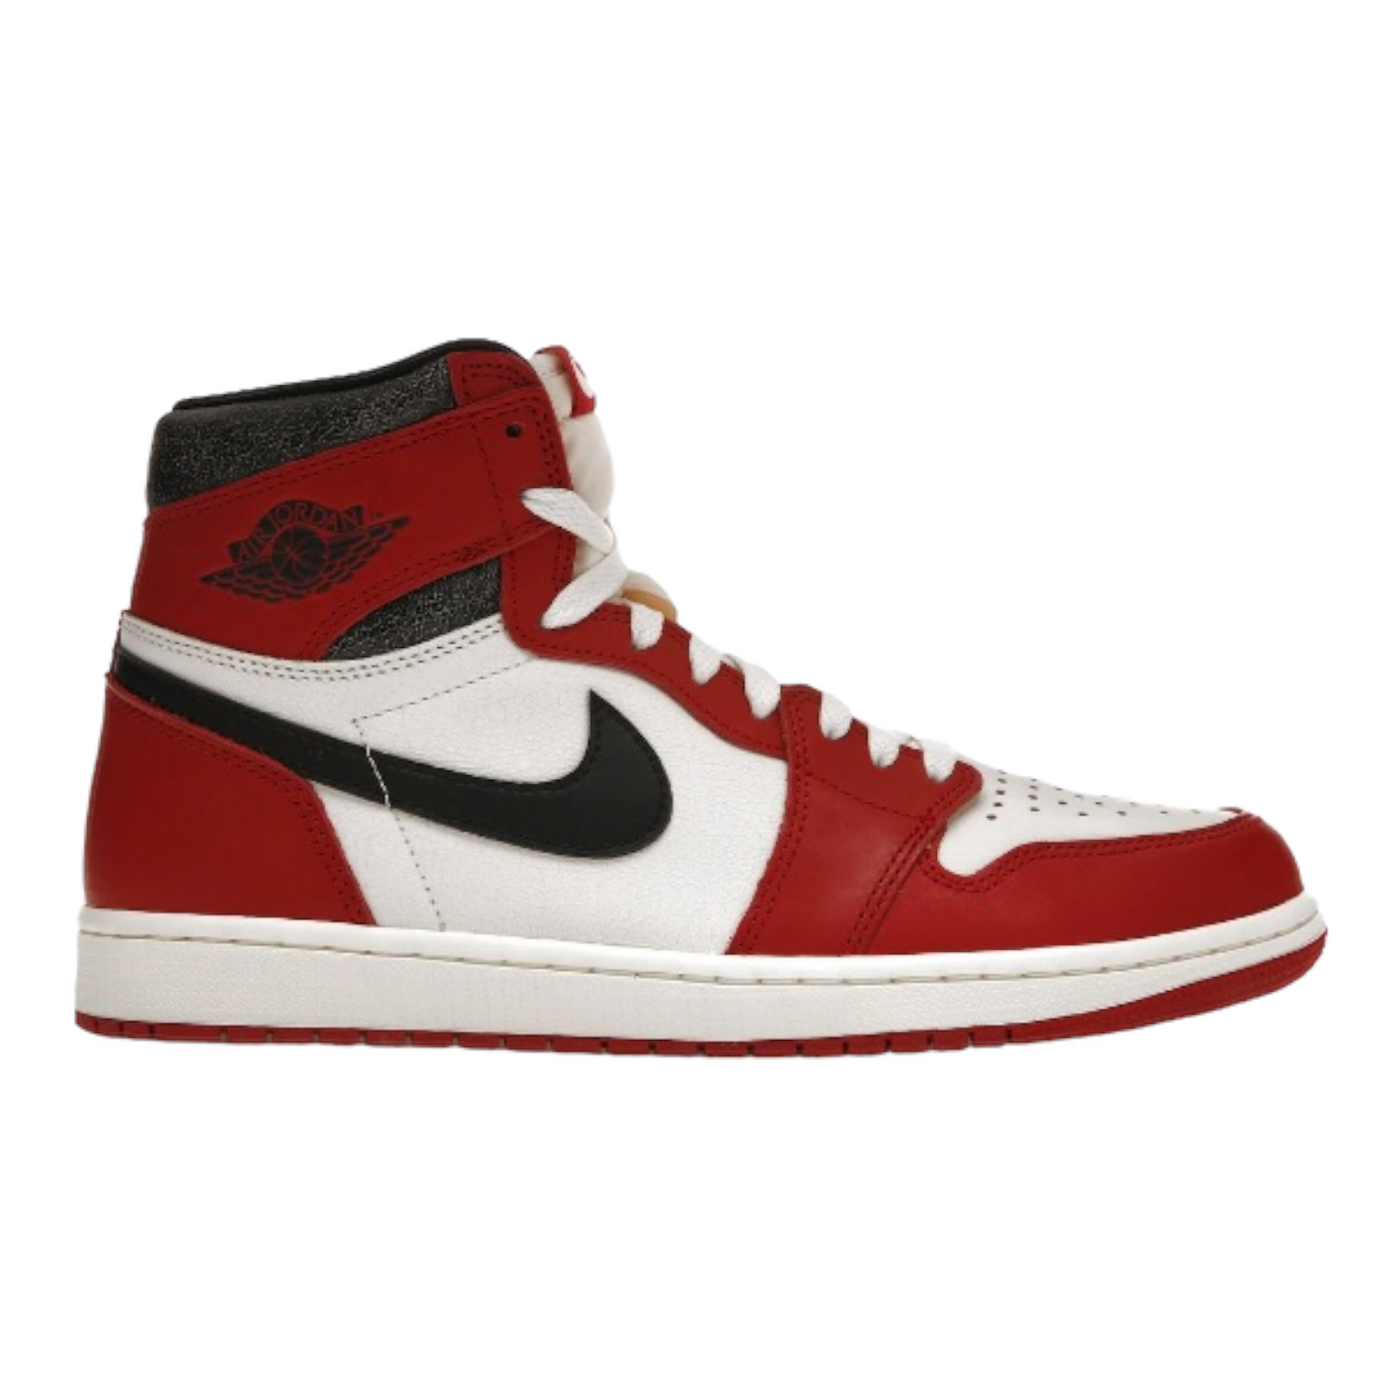 NIKE AIR JORDAN 1 RETRO HIGH OG CHICAGO LOST AND FOUND